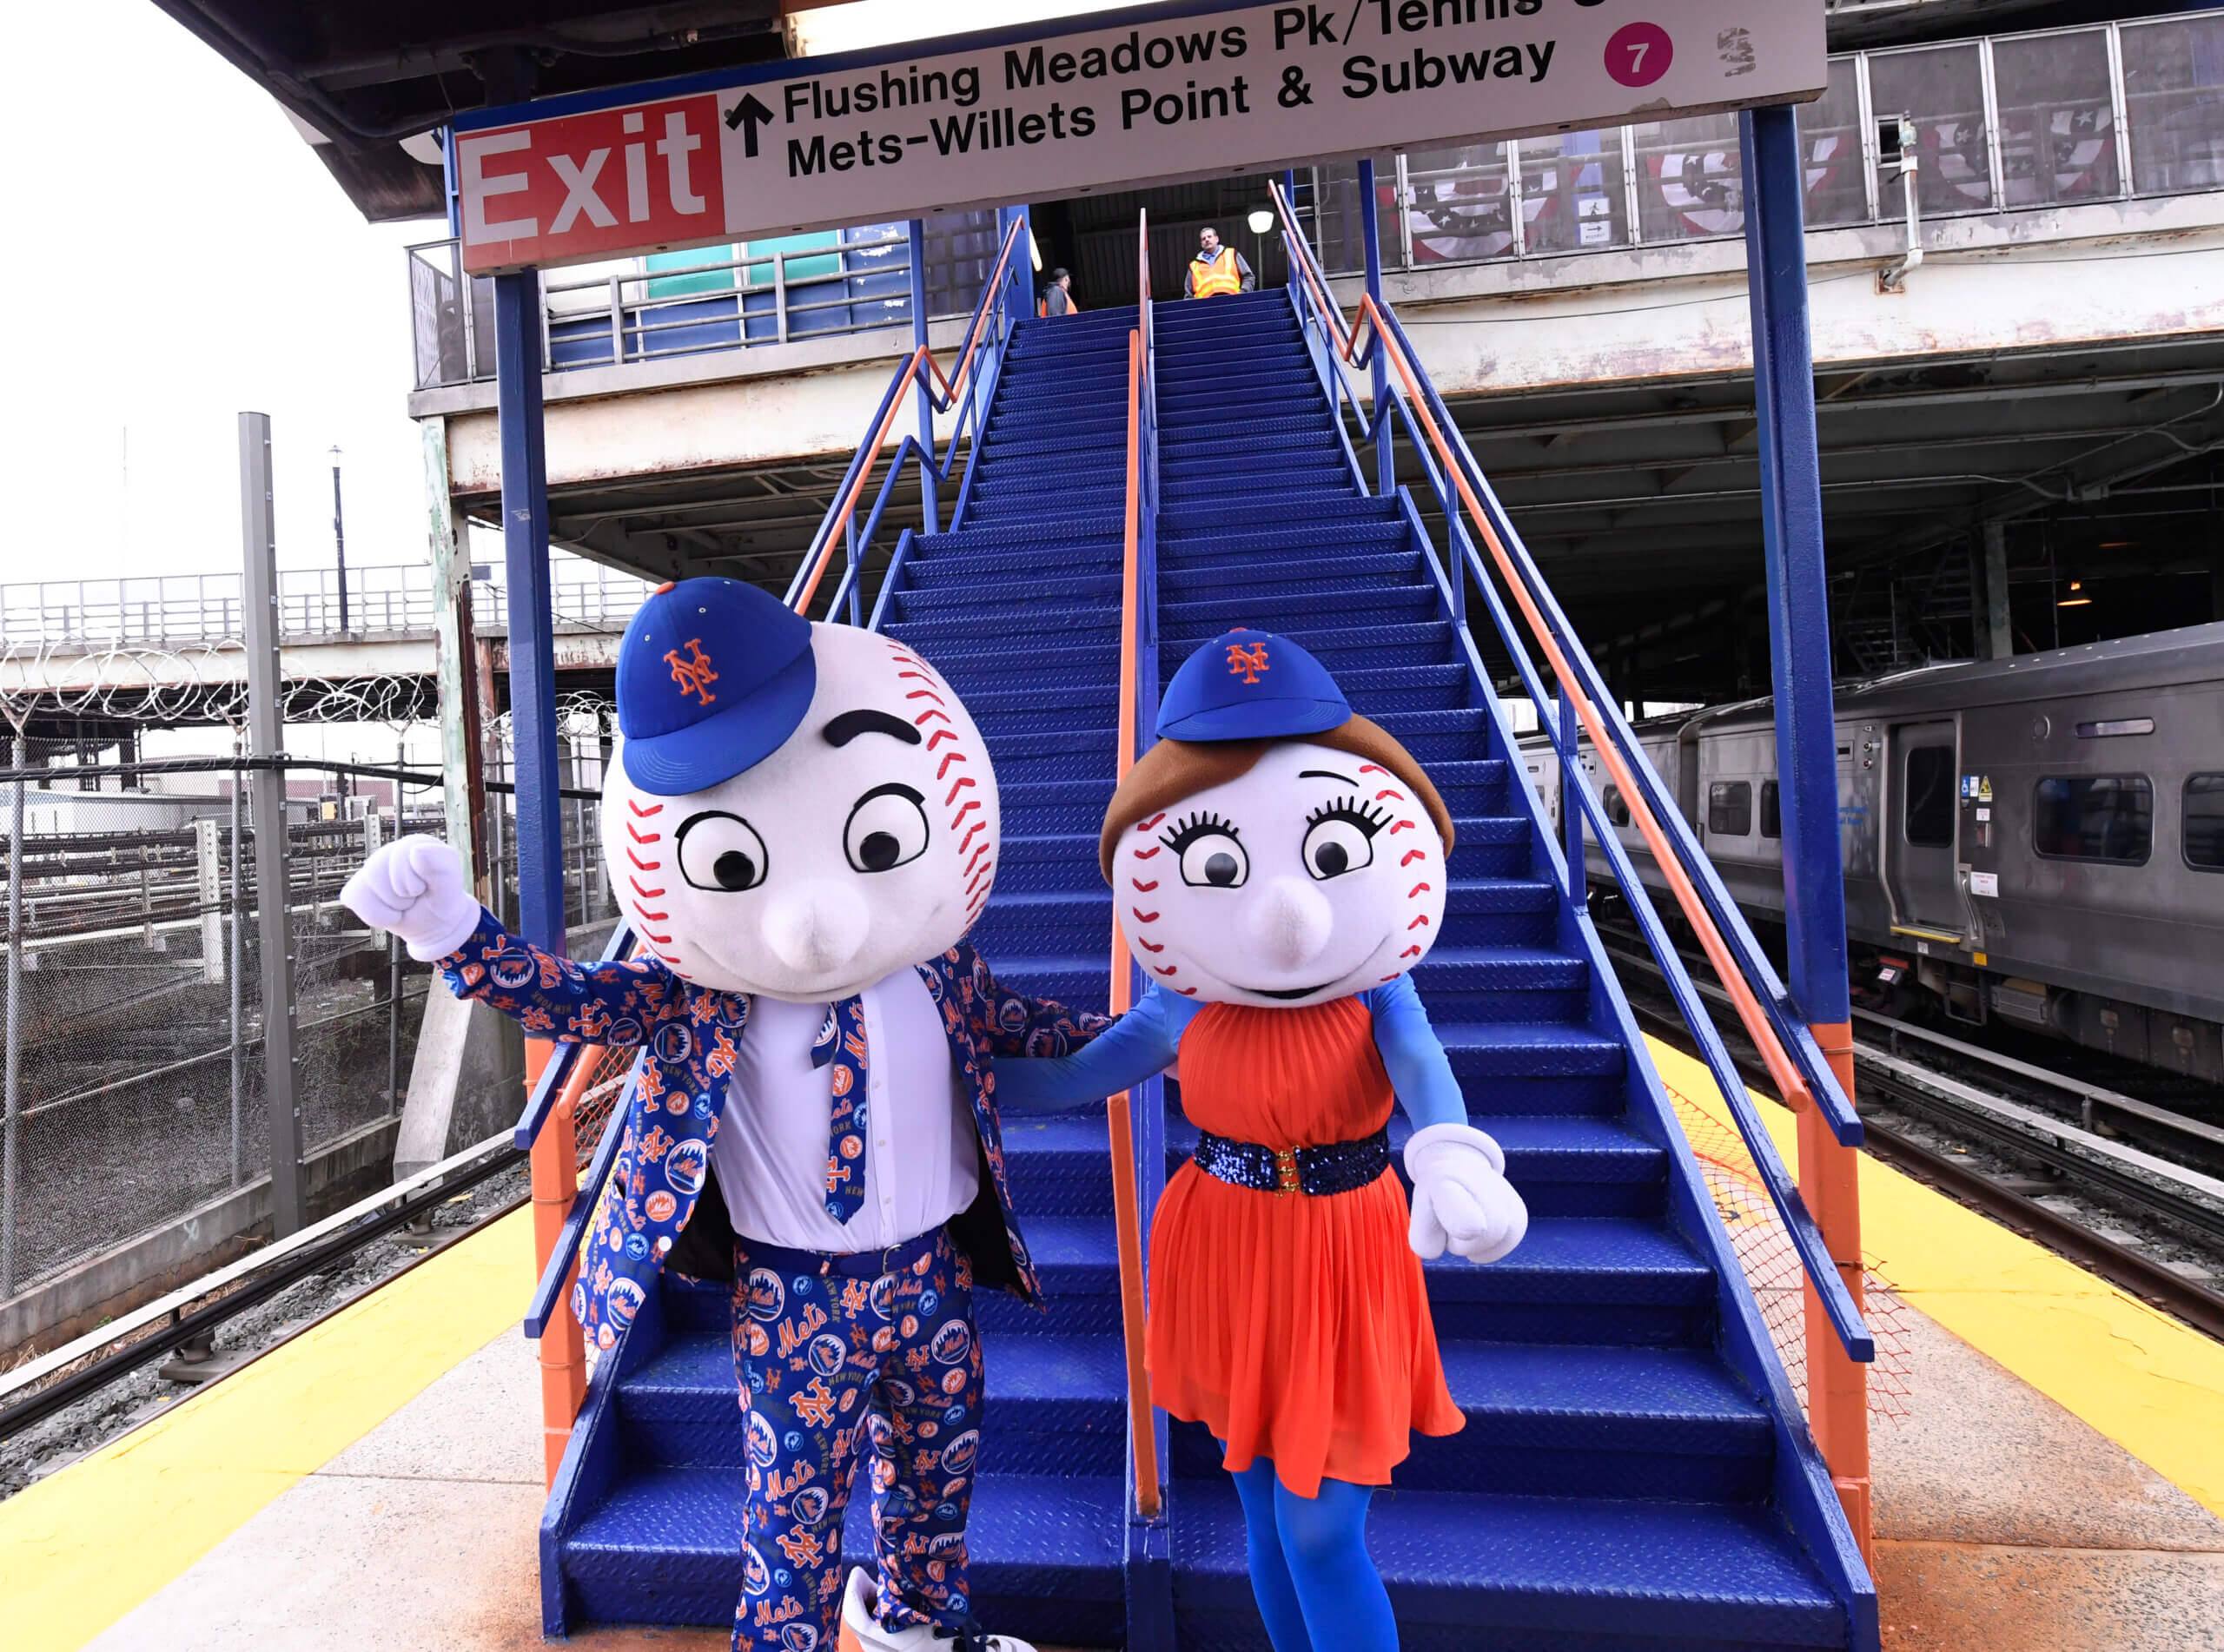 Let's go Mets-Willets Point! LIRR bringing 24/7 service to station serving  Citi Field and U.S. Open's home